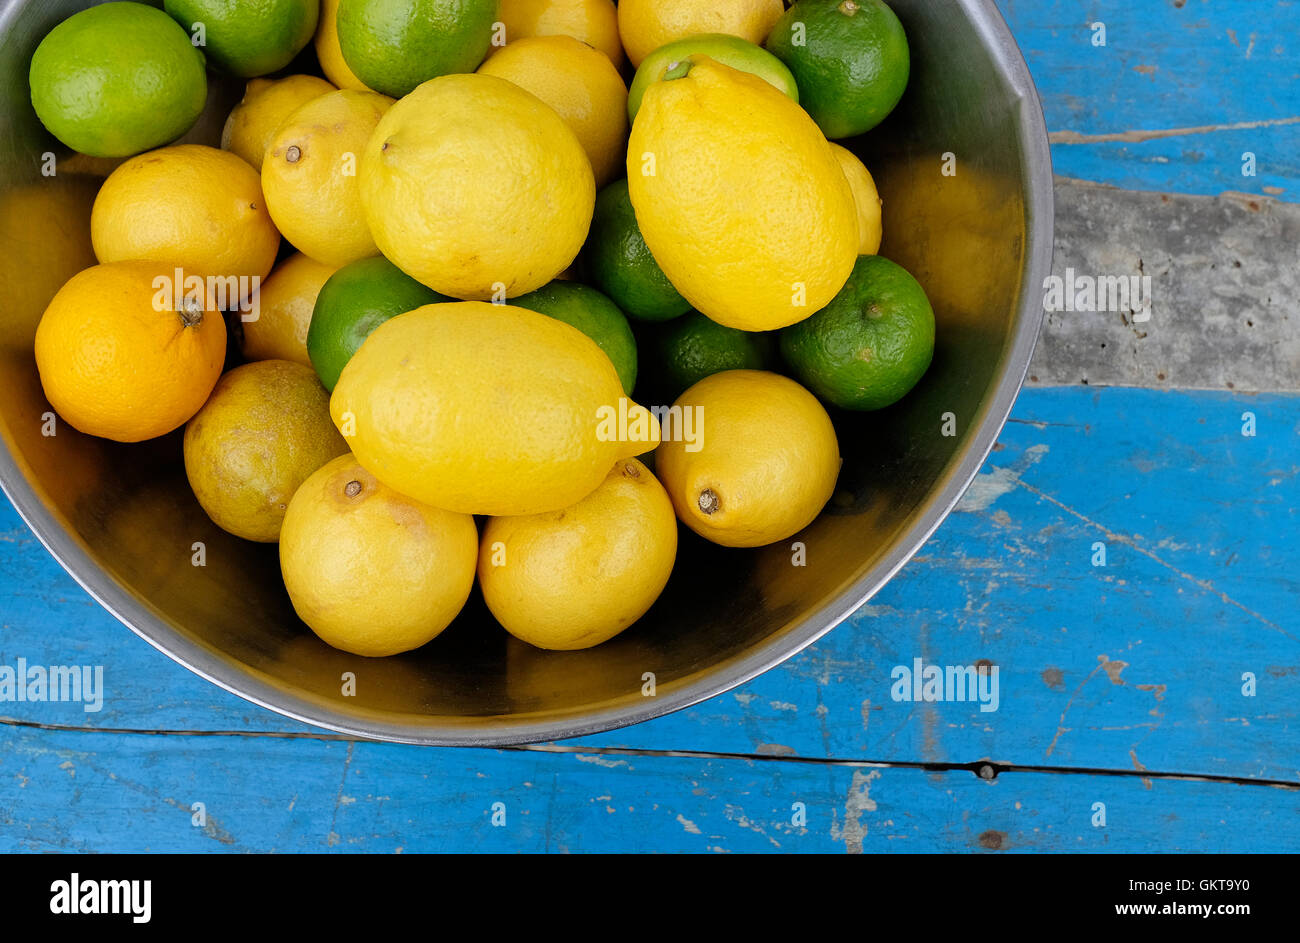 lemons and limes in metal bowl Stock Photo